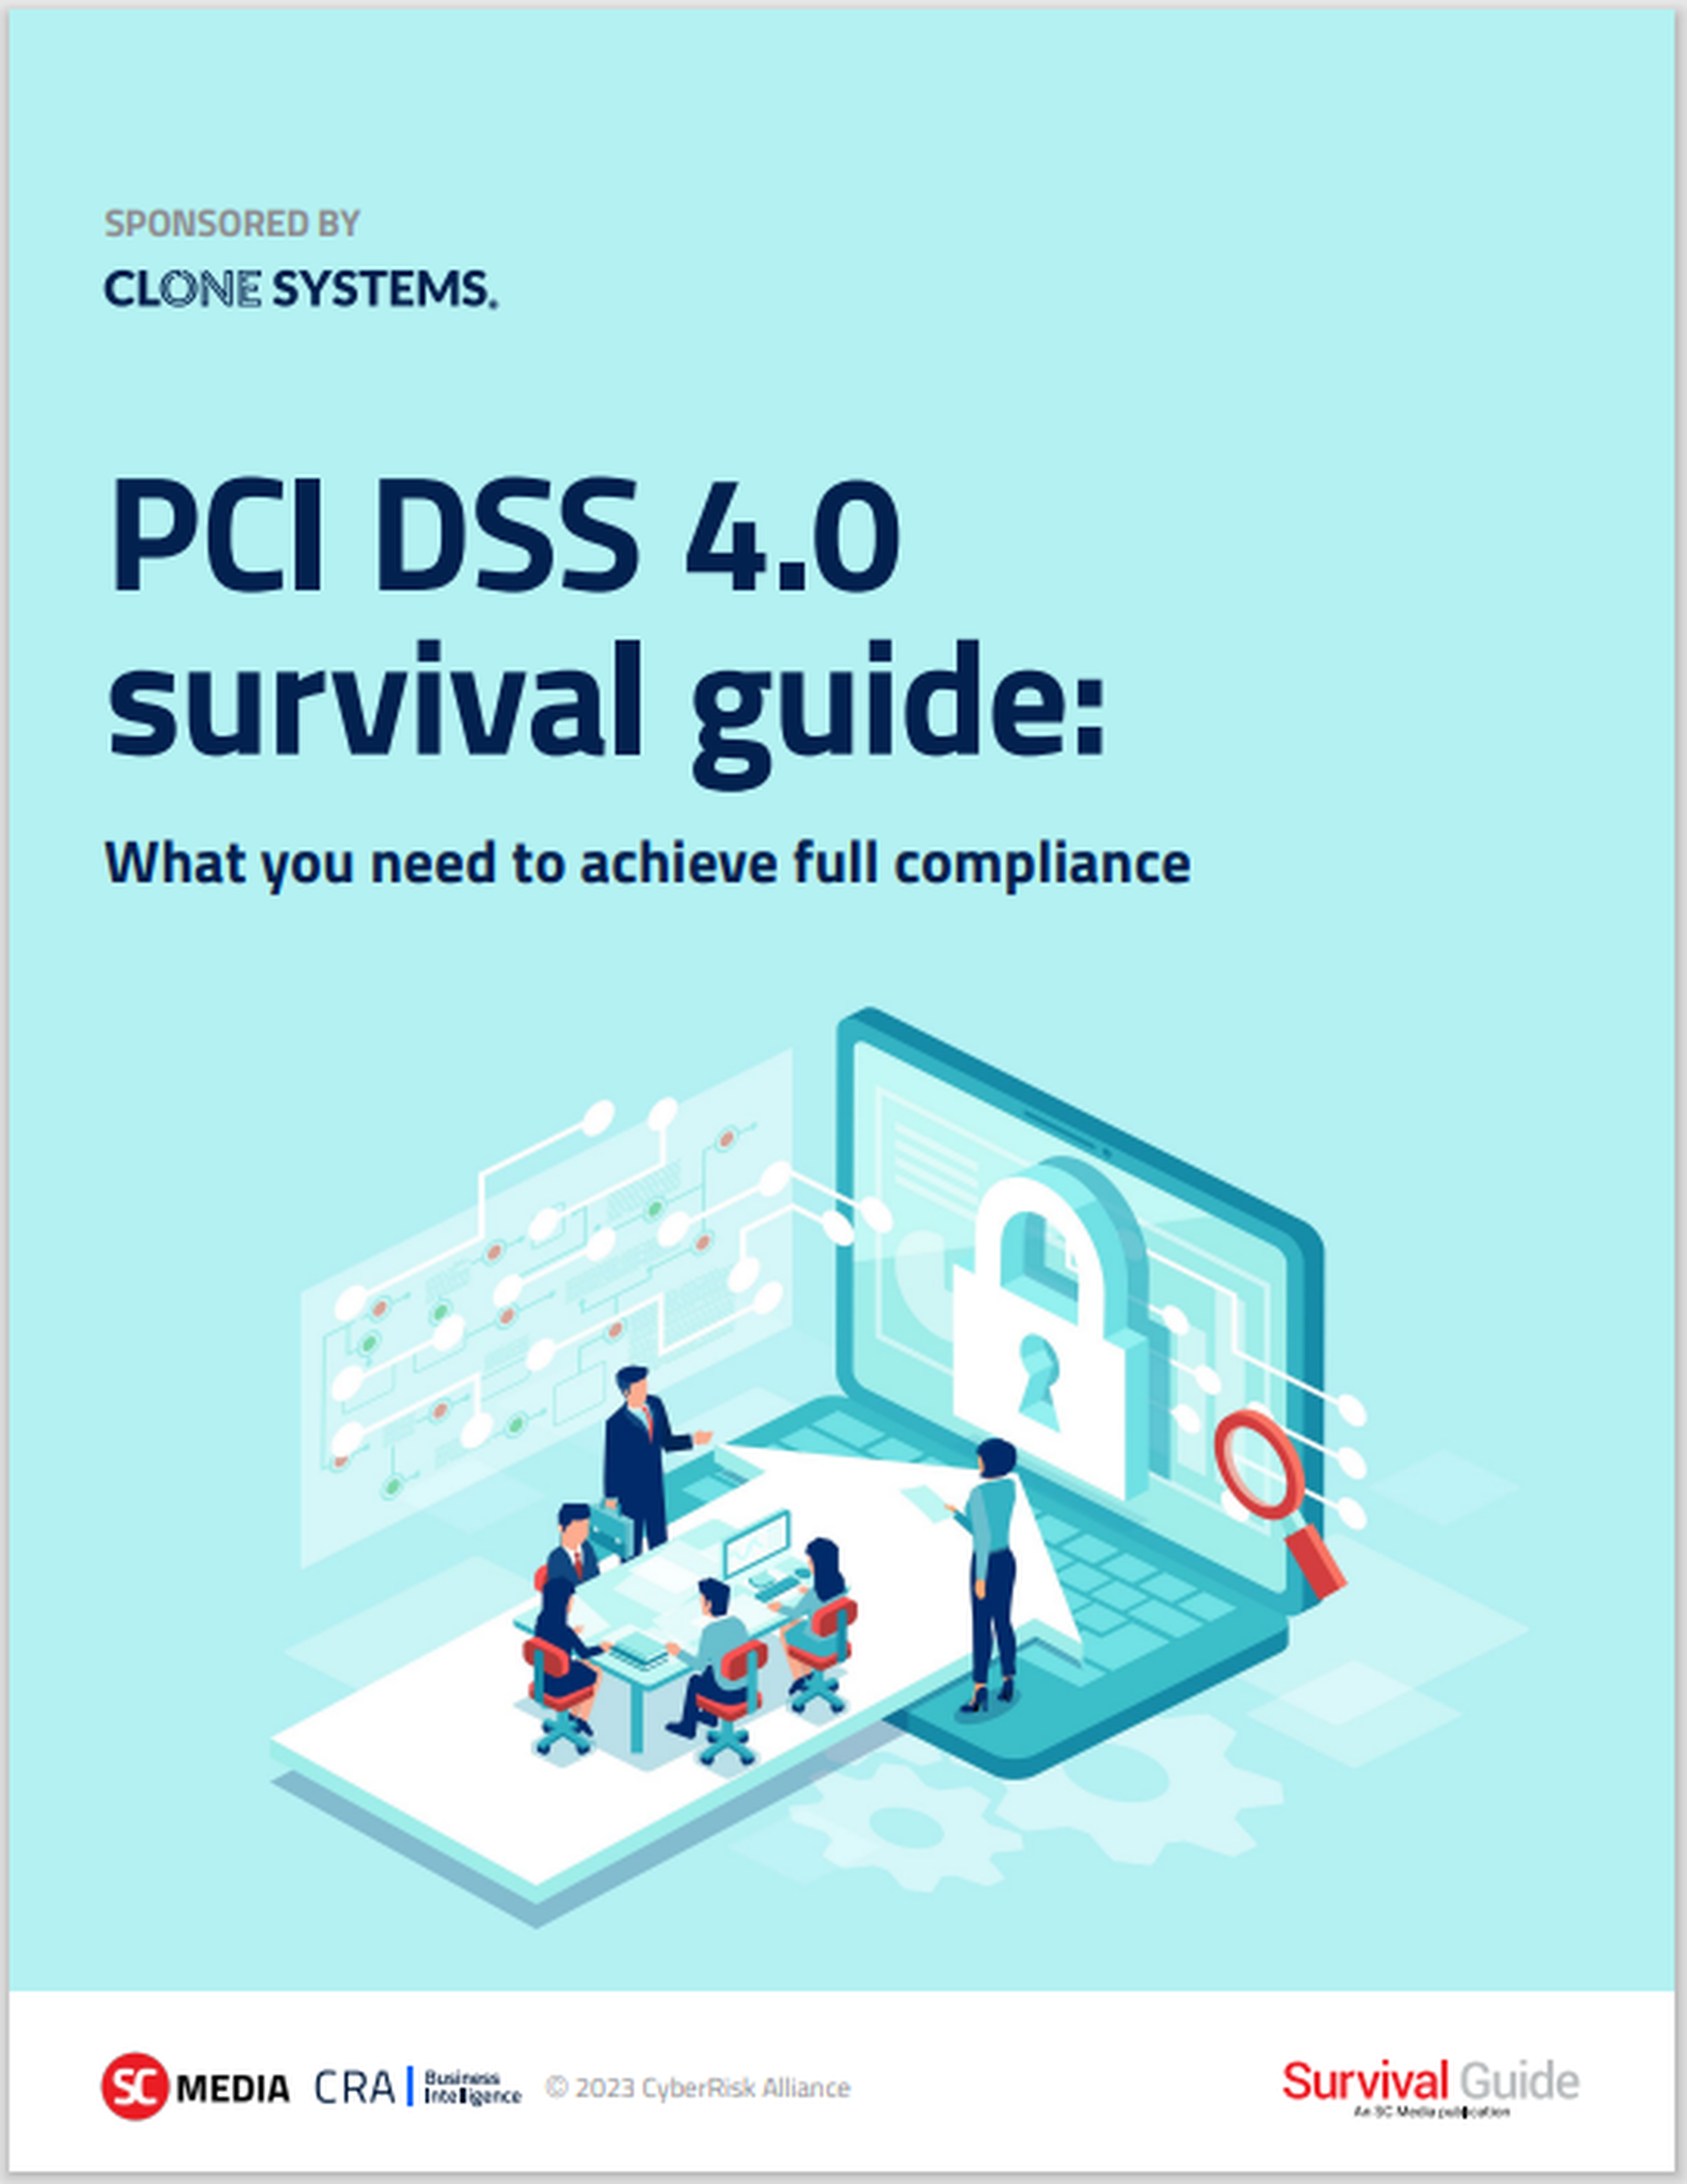 PCI DSS 4.0: What You Need to Achieve Full Compliance